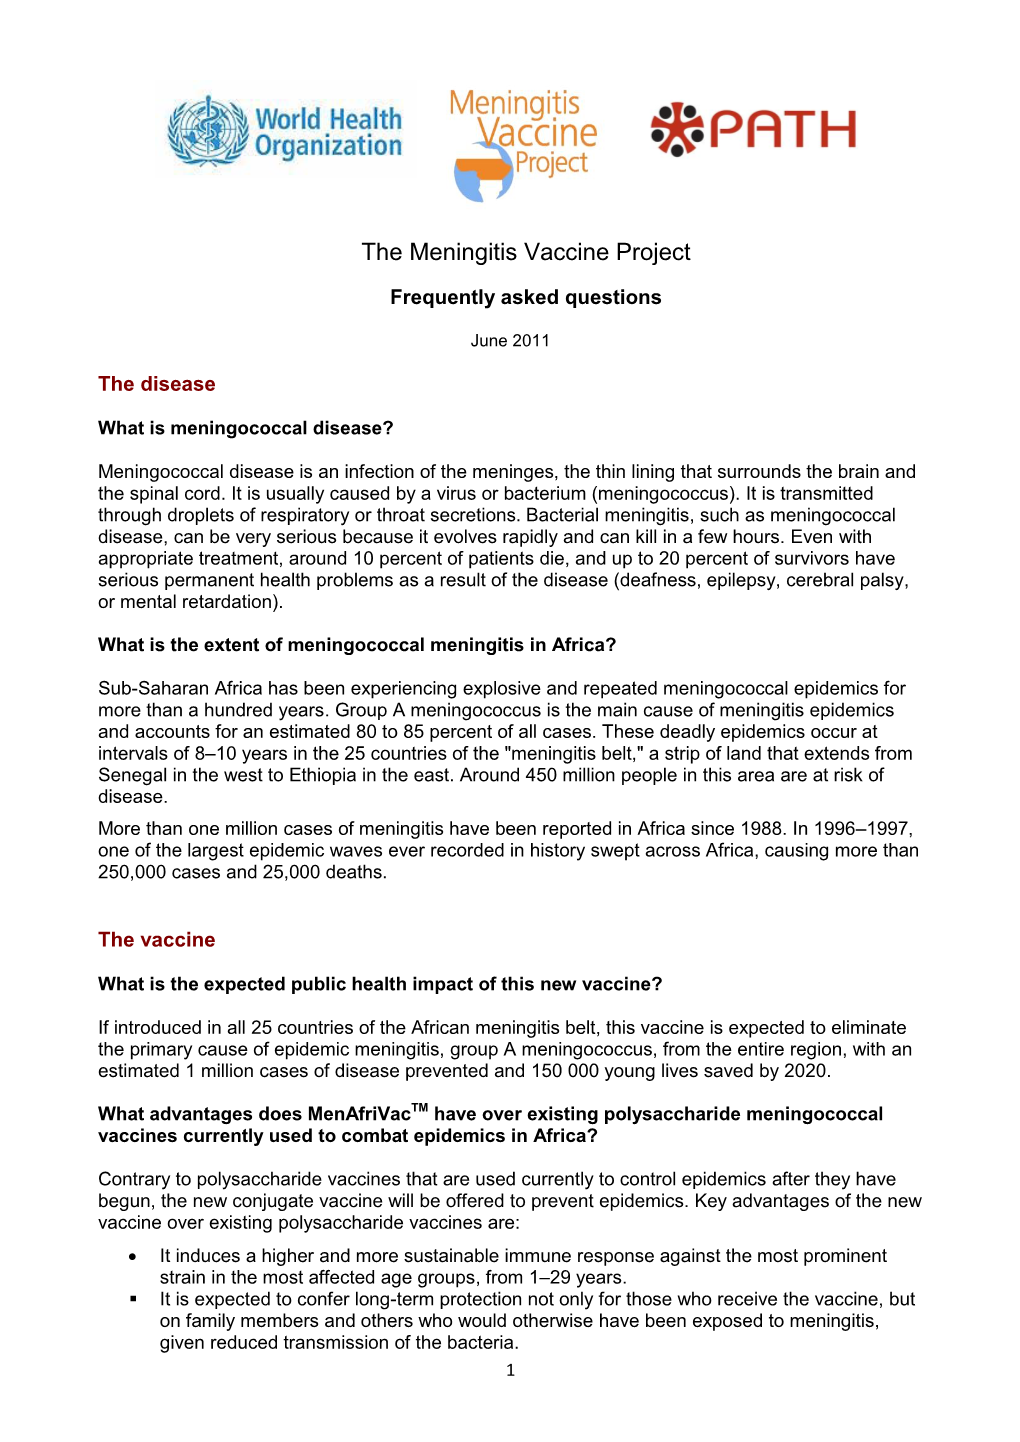 The Meningitis Vaccine Project: Frequently Asked Questions